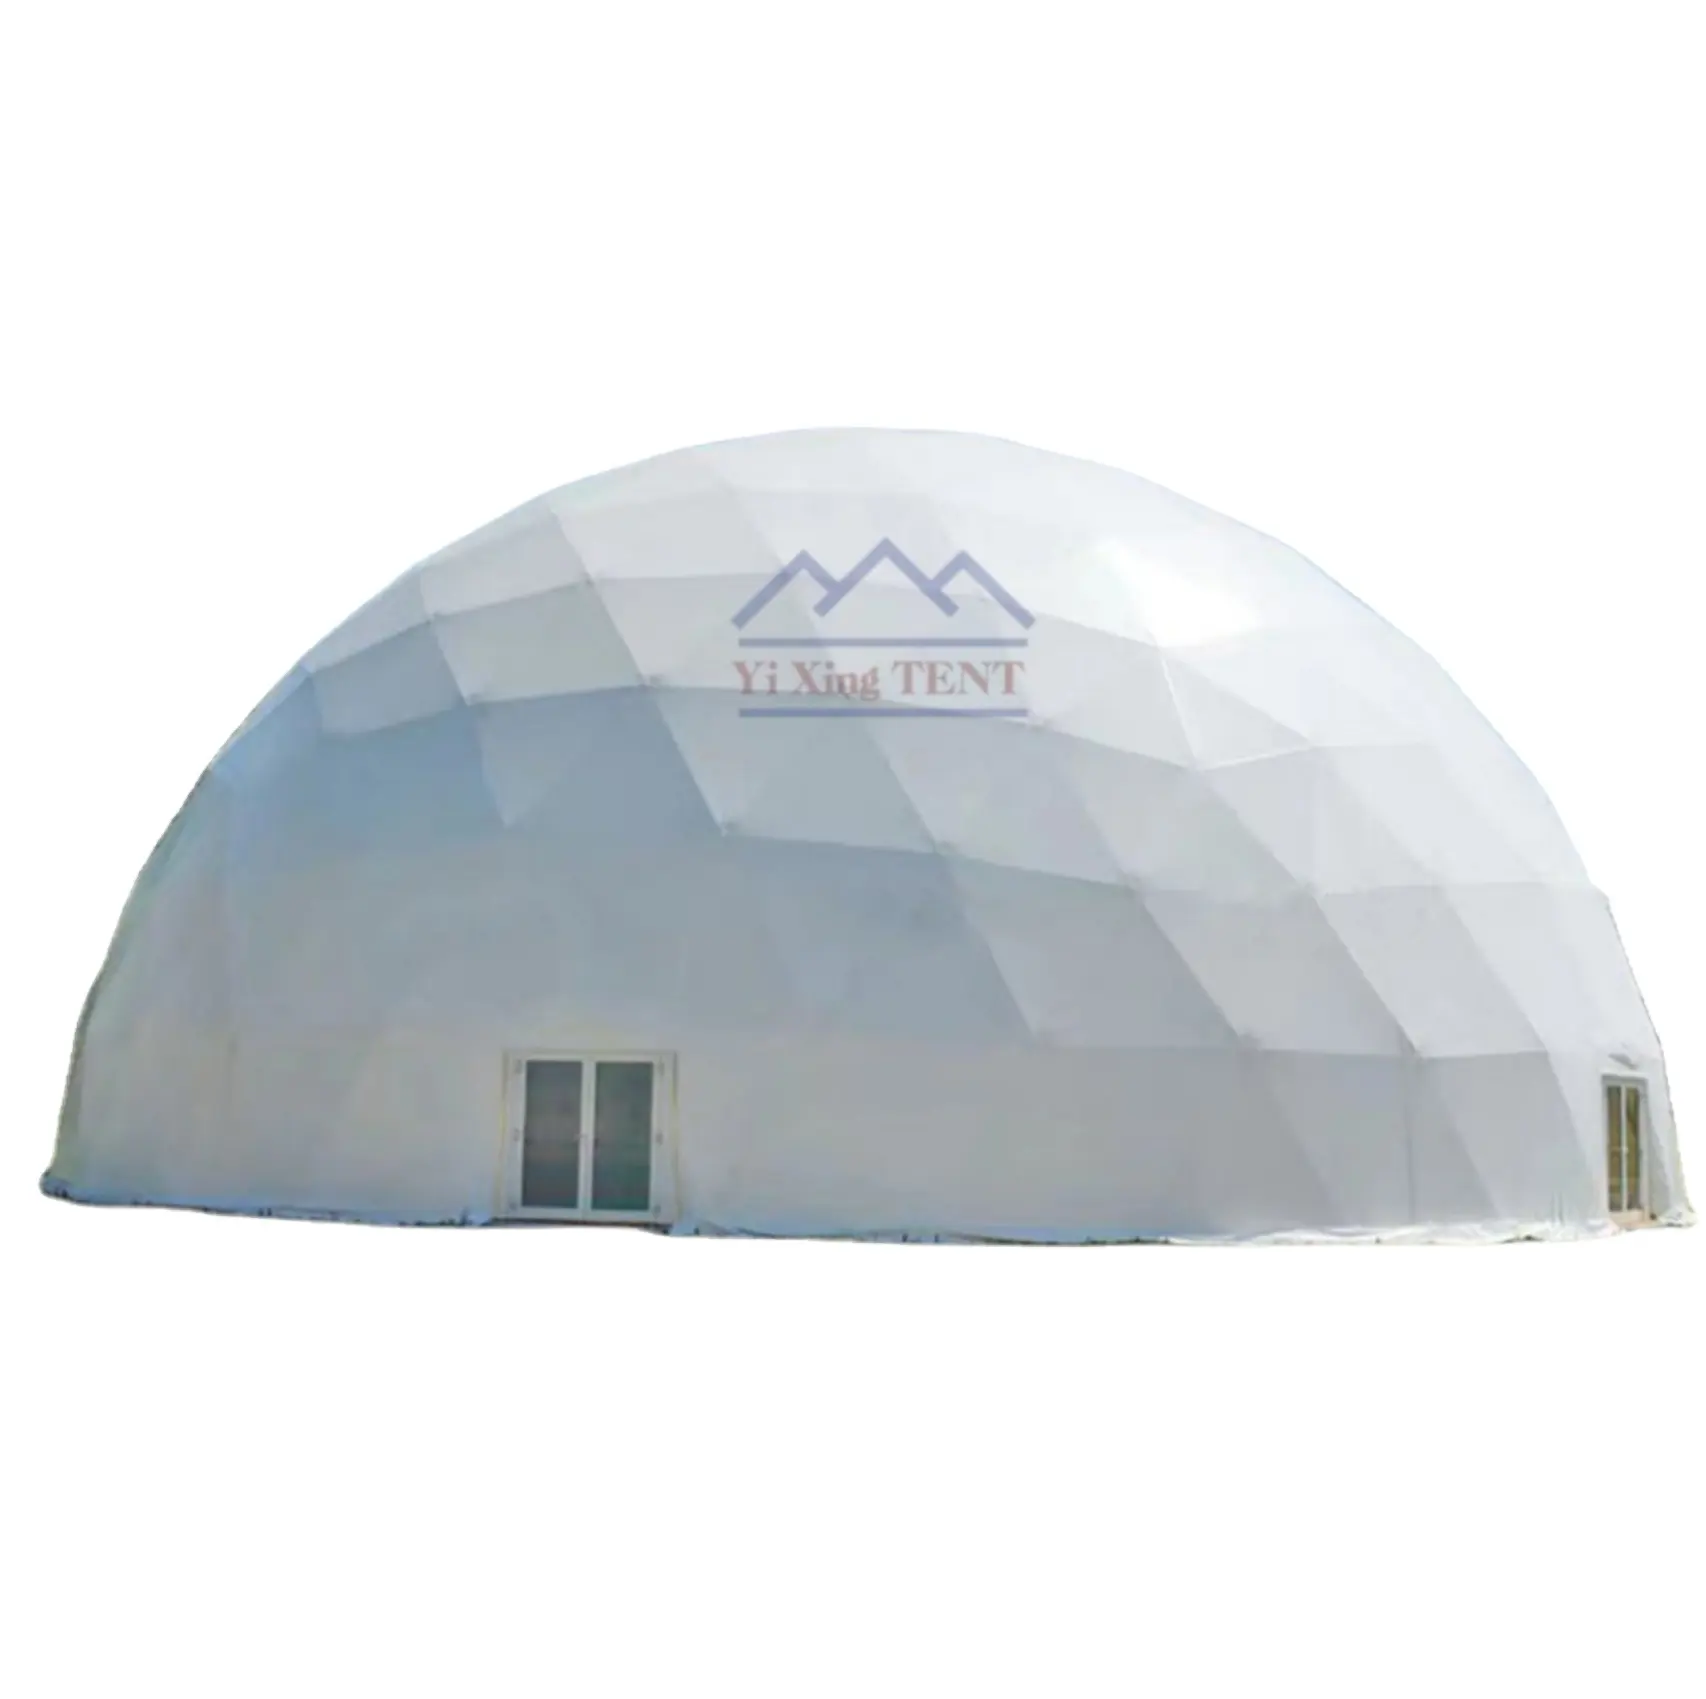 40m diameter large size dome tent meeting room living room exhibition event waterproof and windproof PVC dome tent